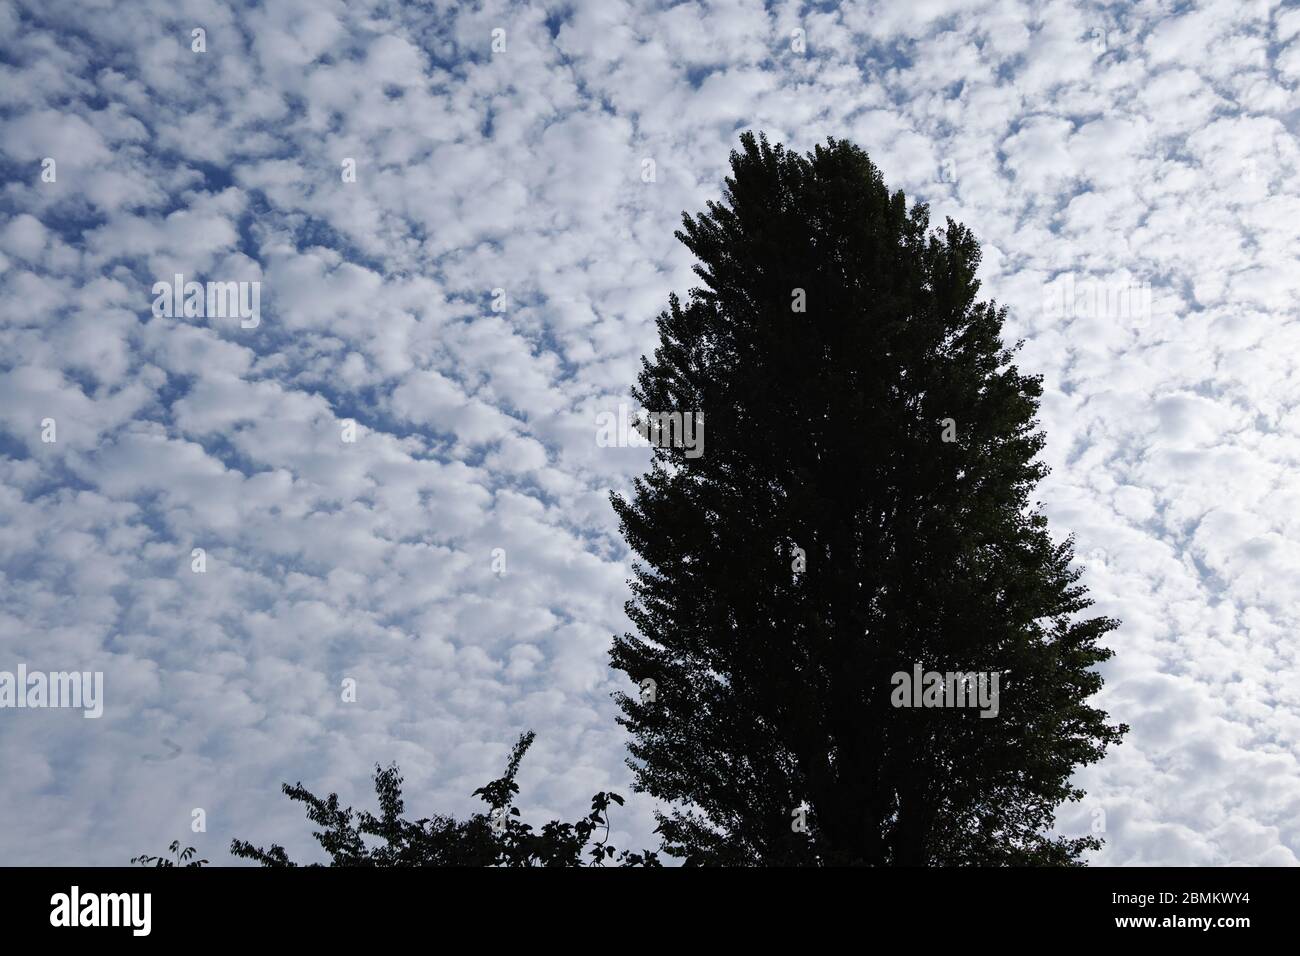 silhouette of a black poplar stands out against a sky covered with clear altocumulus clouds Stock Photo